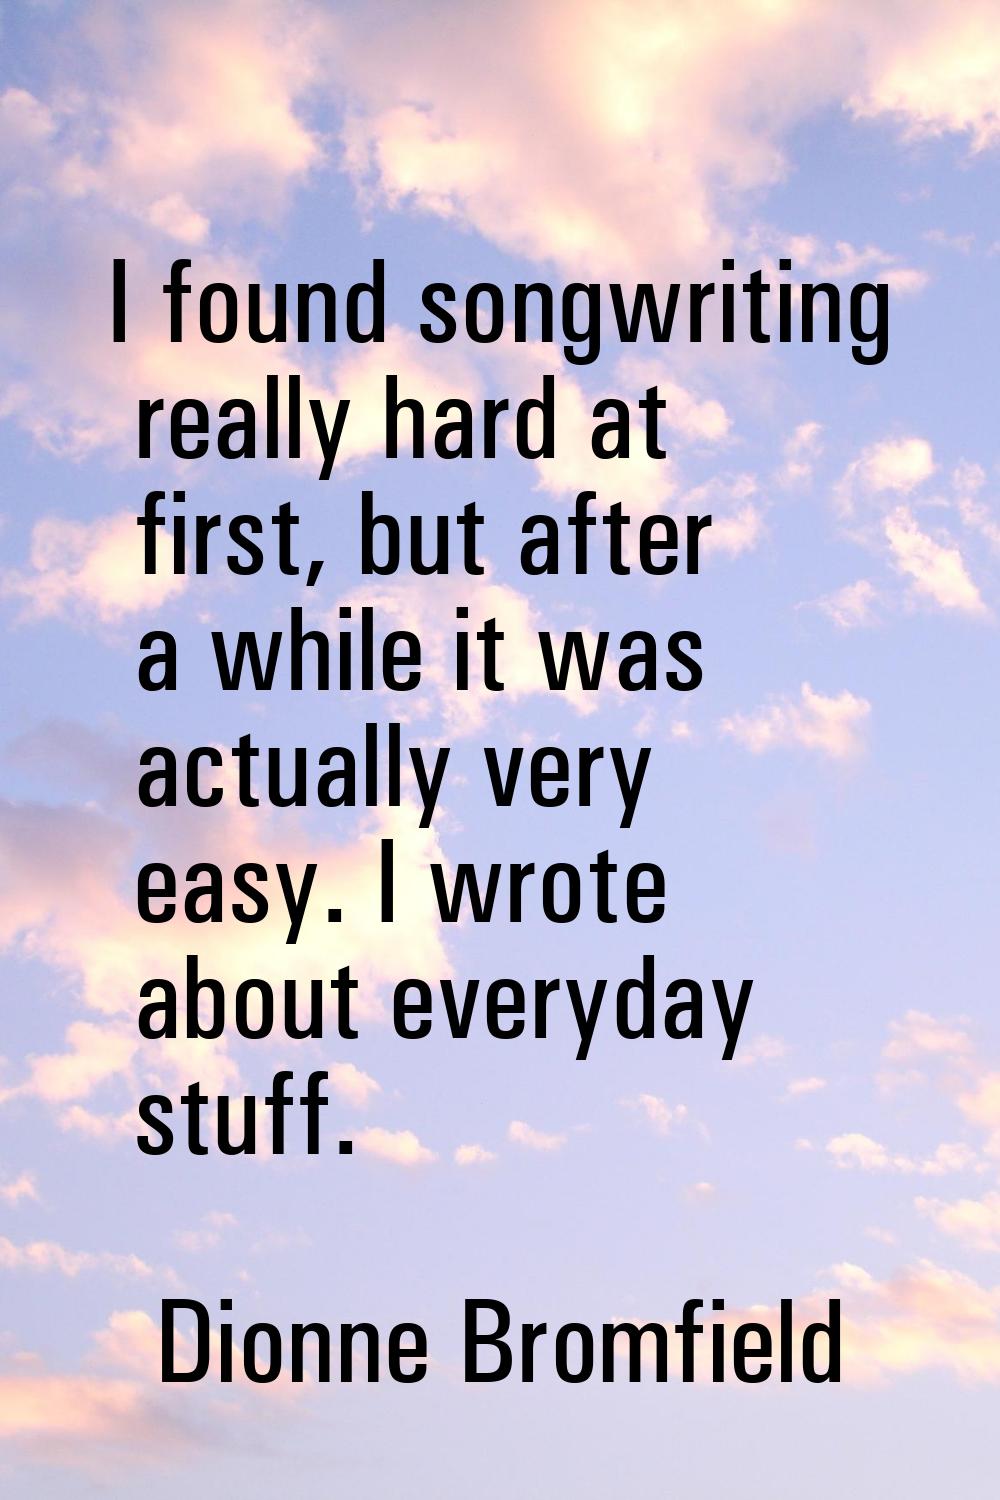 I found songwriting really hard at first, but after a while it was actually very easy. I wrote abou